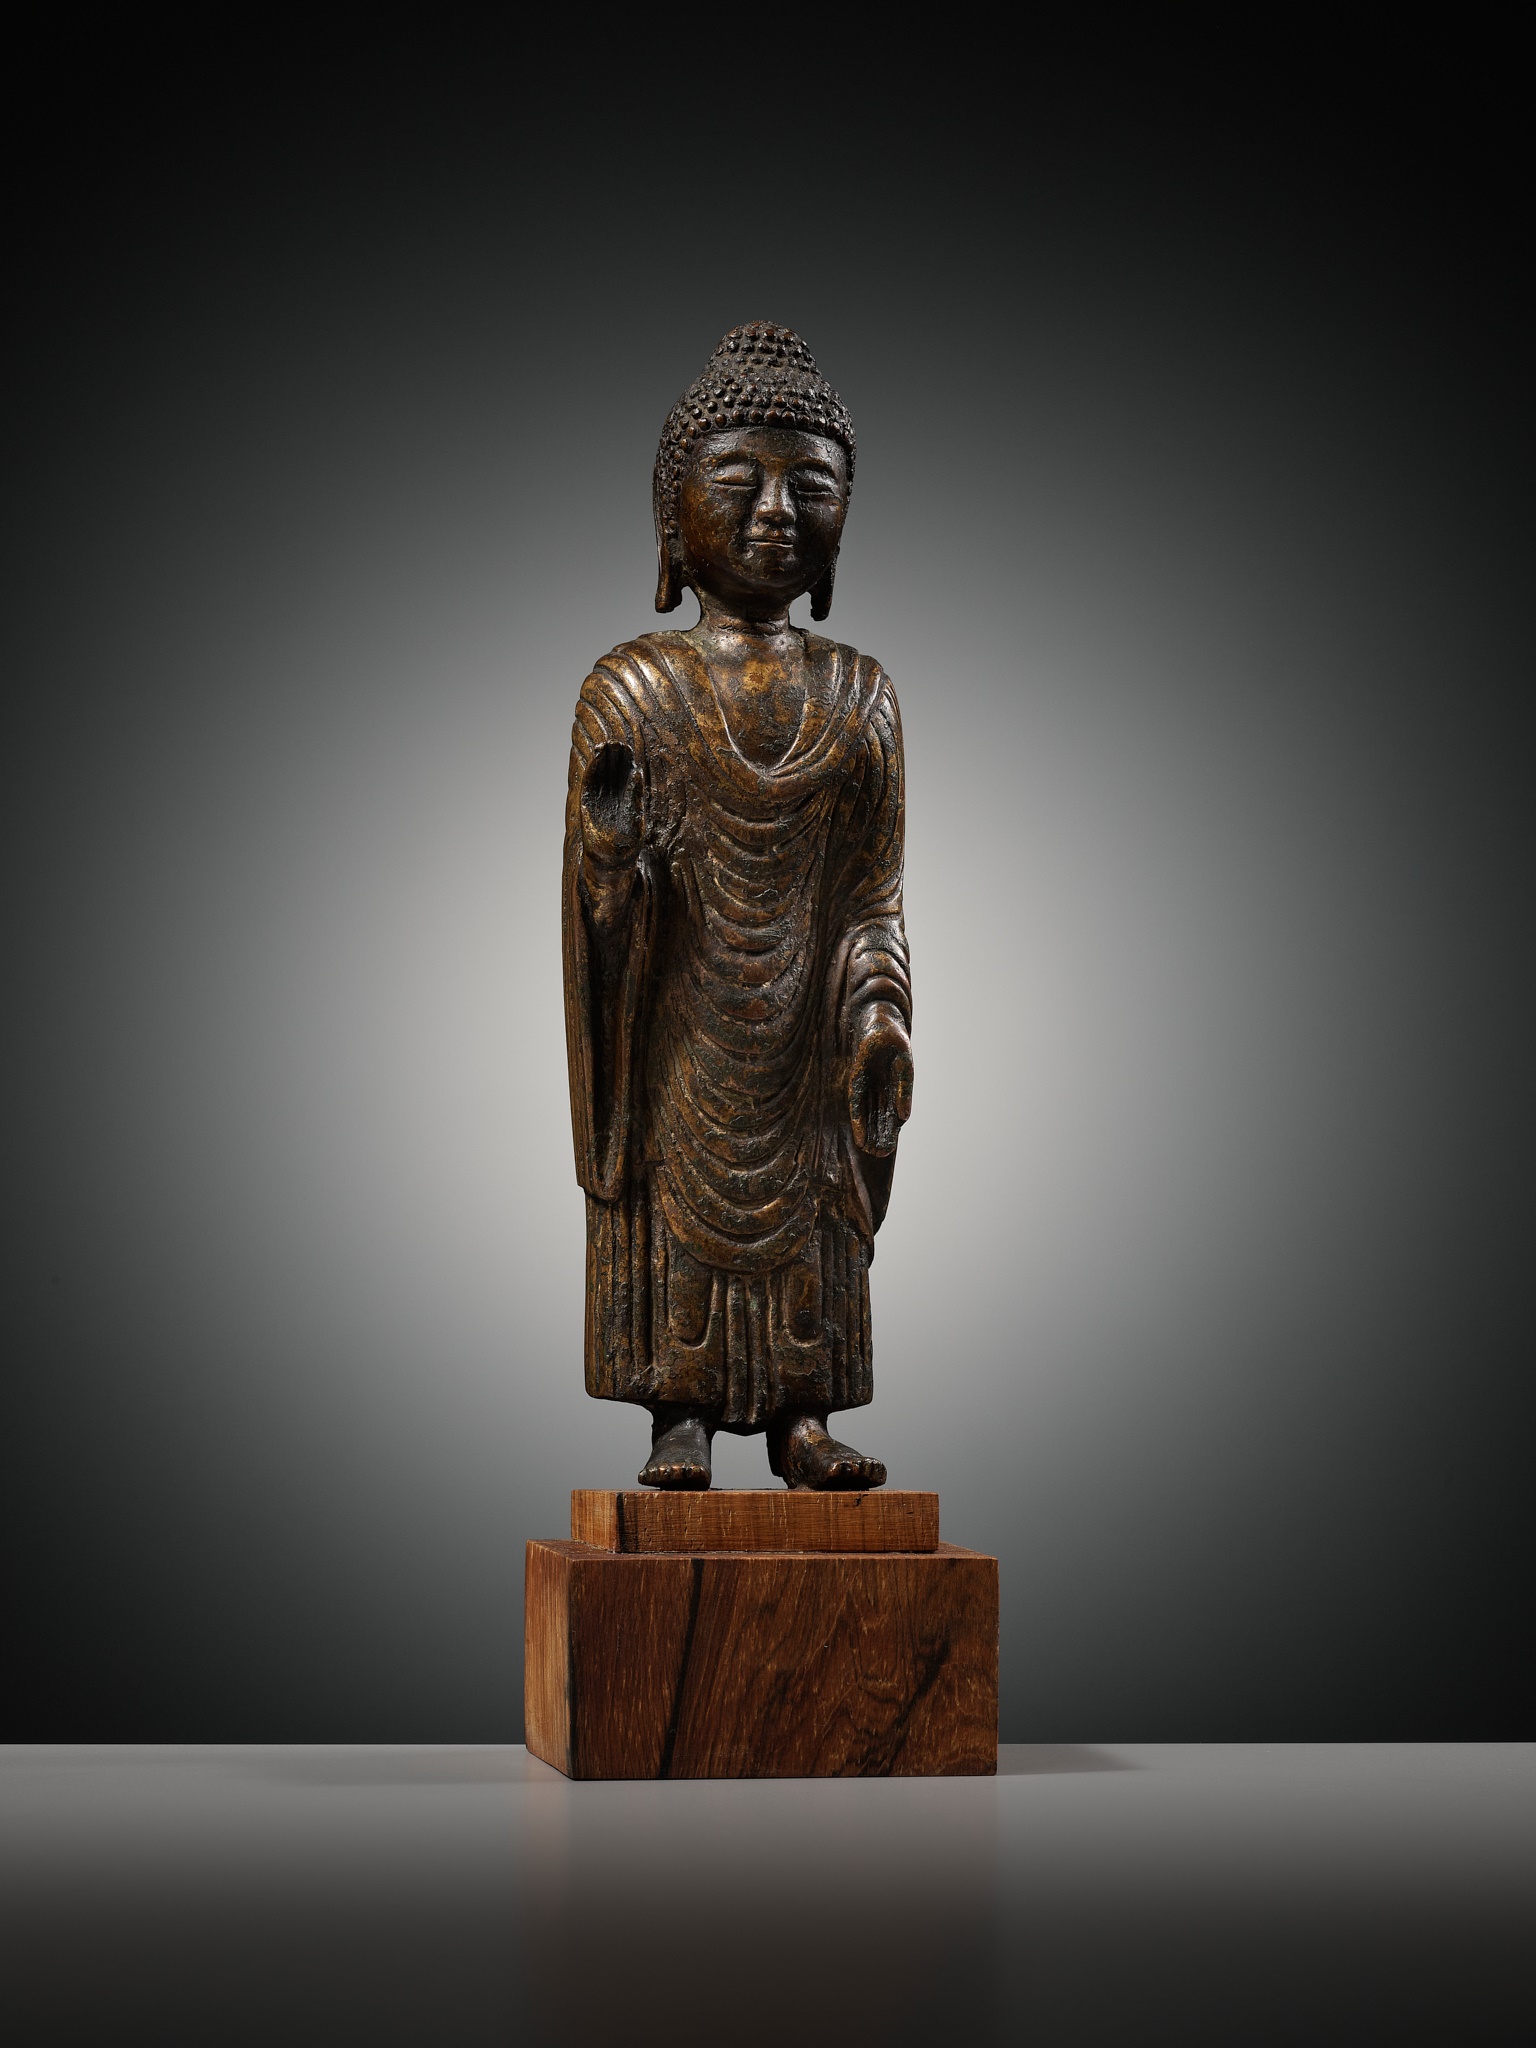 A GILT-BRONZE STANDING FIGURE OF BUDDHA, UNIFIED SILLA DYNASTY, KOREA, 8TH - 9TH CENTURY - Image 12 of 12